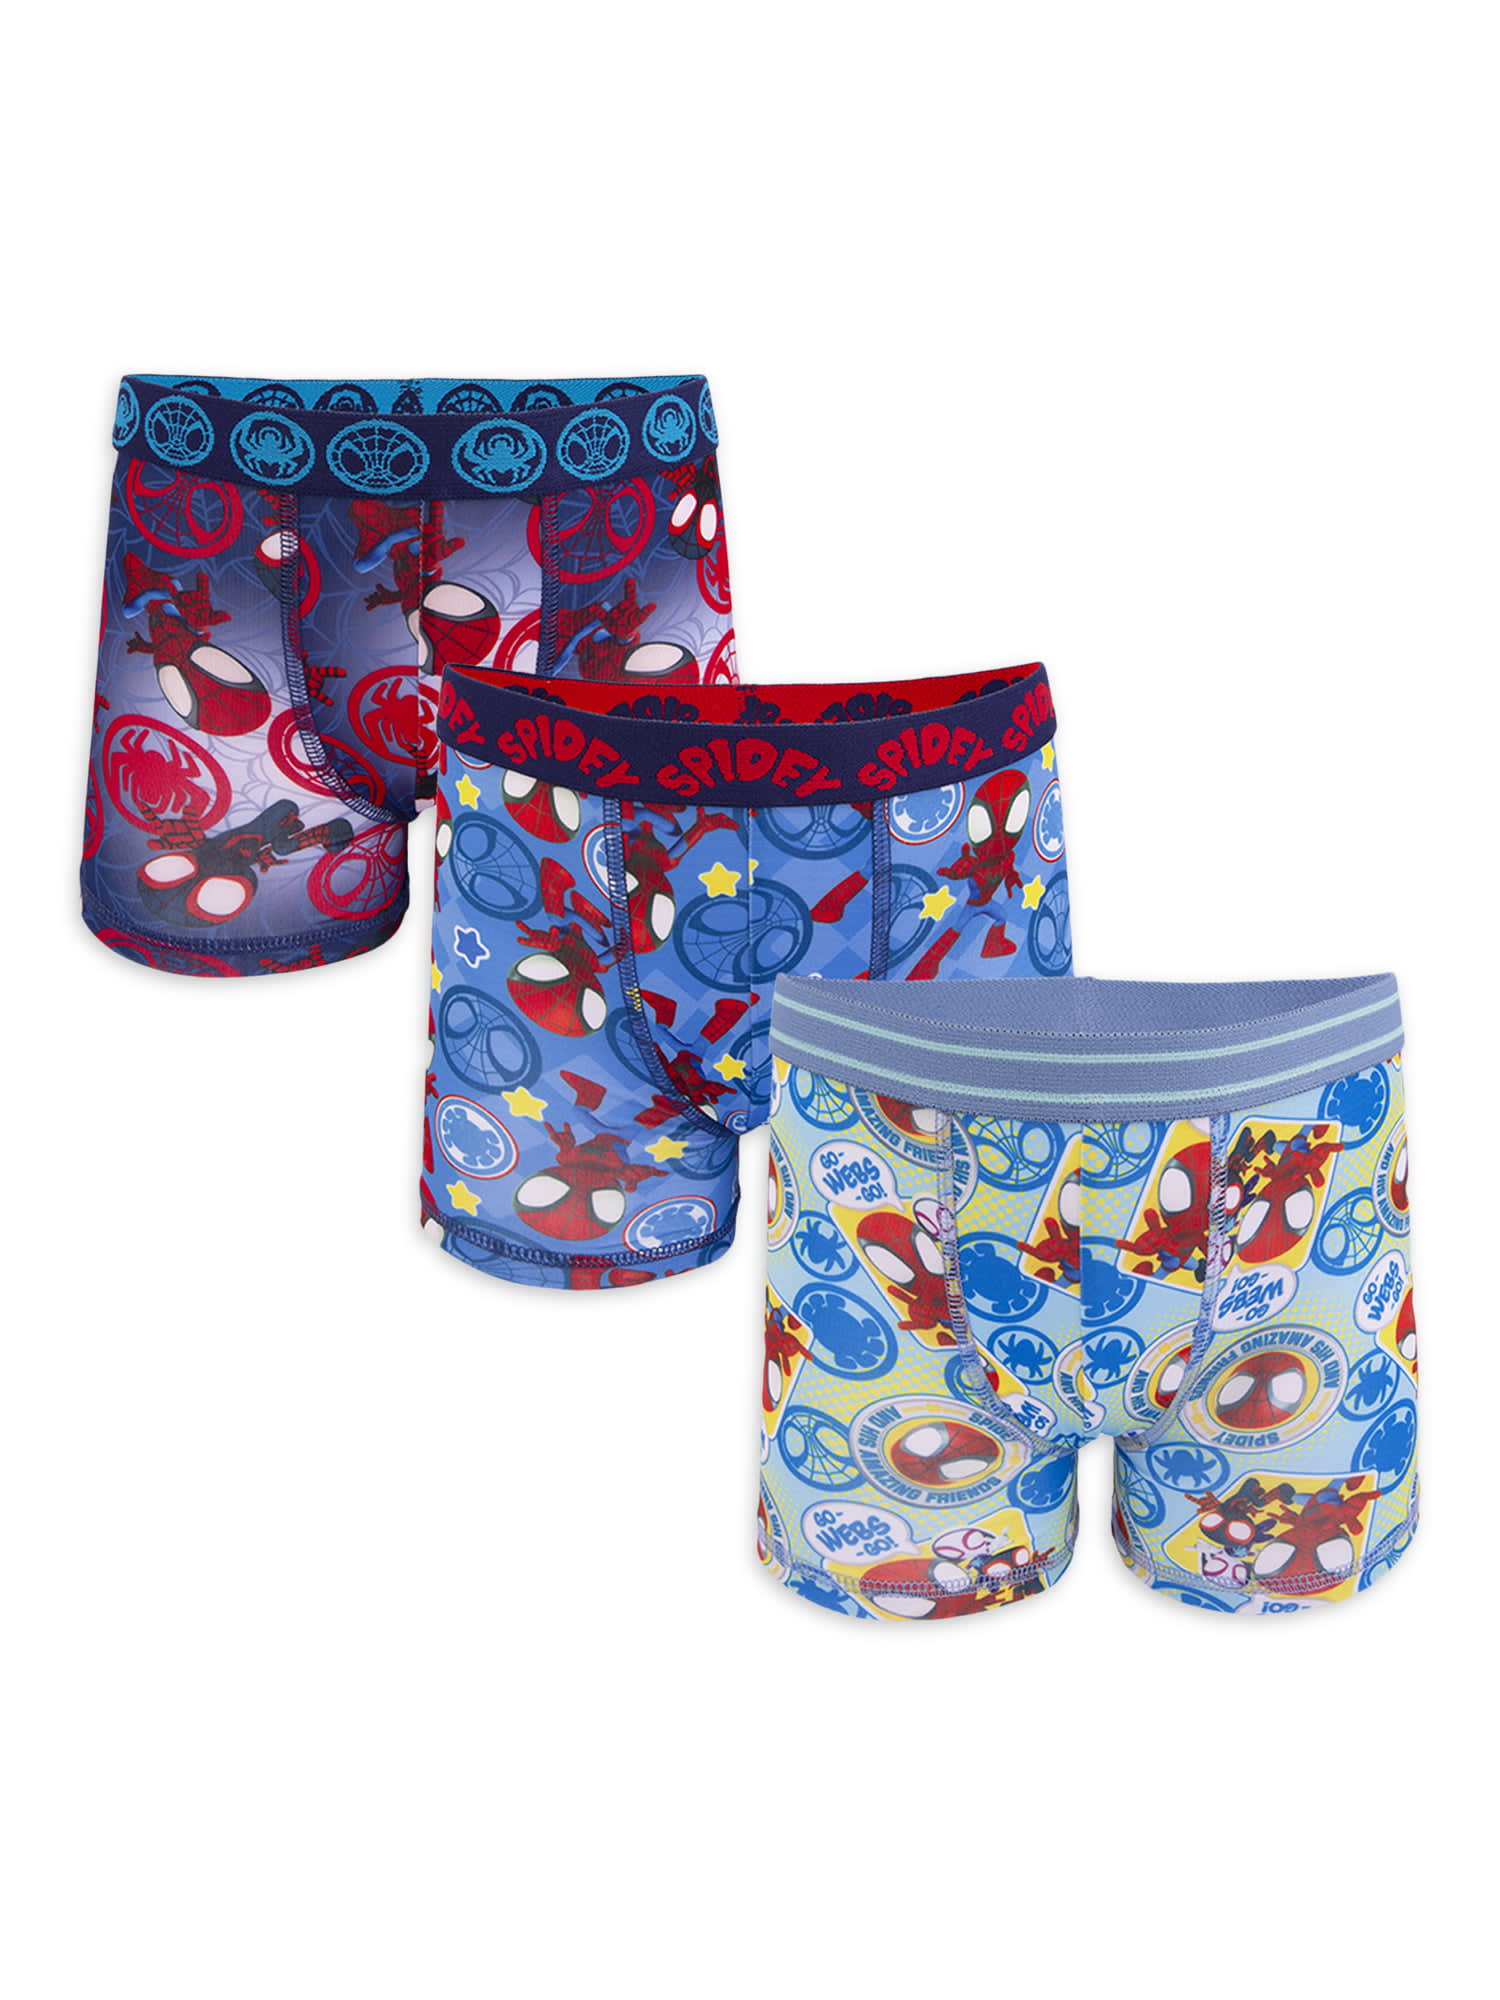 Spiderman Toddler Boys Boxer Briefs, 3 Pack, Sizes 2T-4T - DroneUp